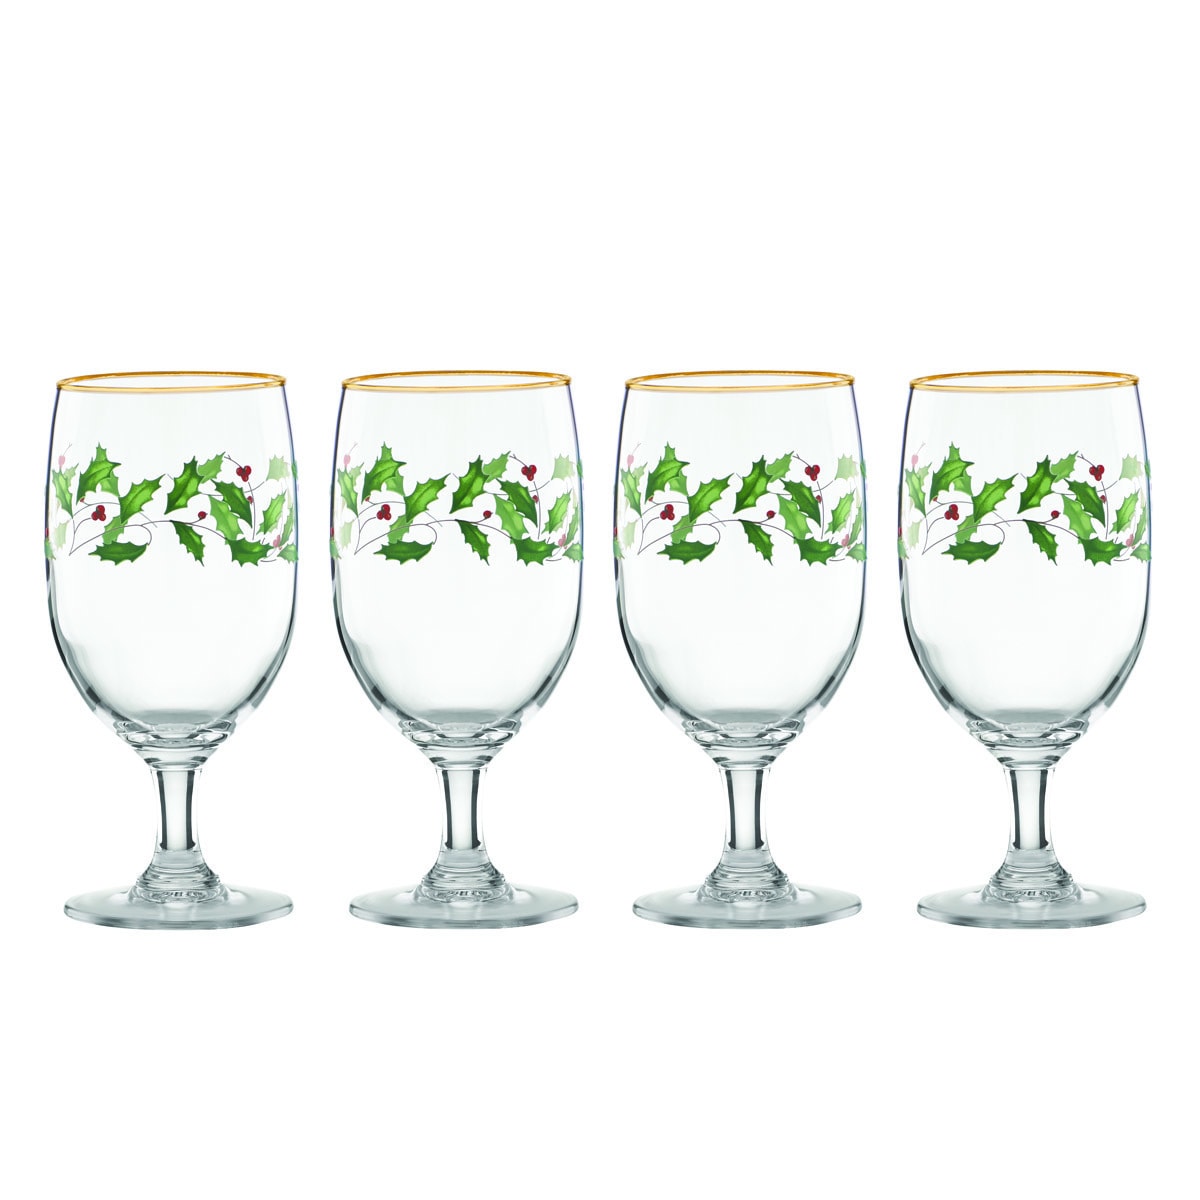 https://ak1.ostkcdn.com/images/products/9694821/Lenox-Holiday-Decal-4-piece-Iced-Beverage-Glass-Set-ff7c04d9-9922-4e9a-be27-0334aa1be13d.jpg